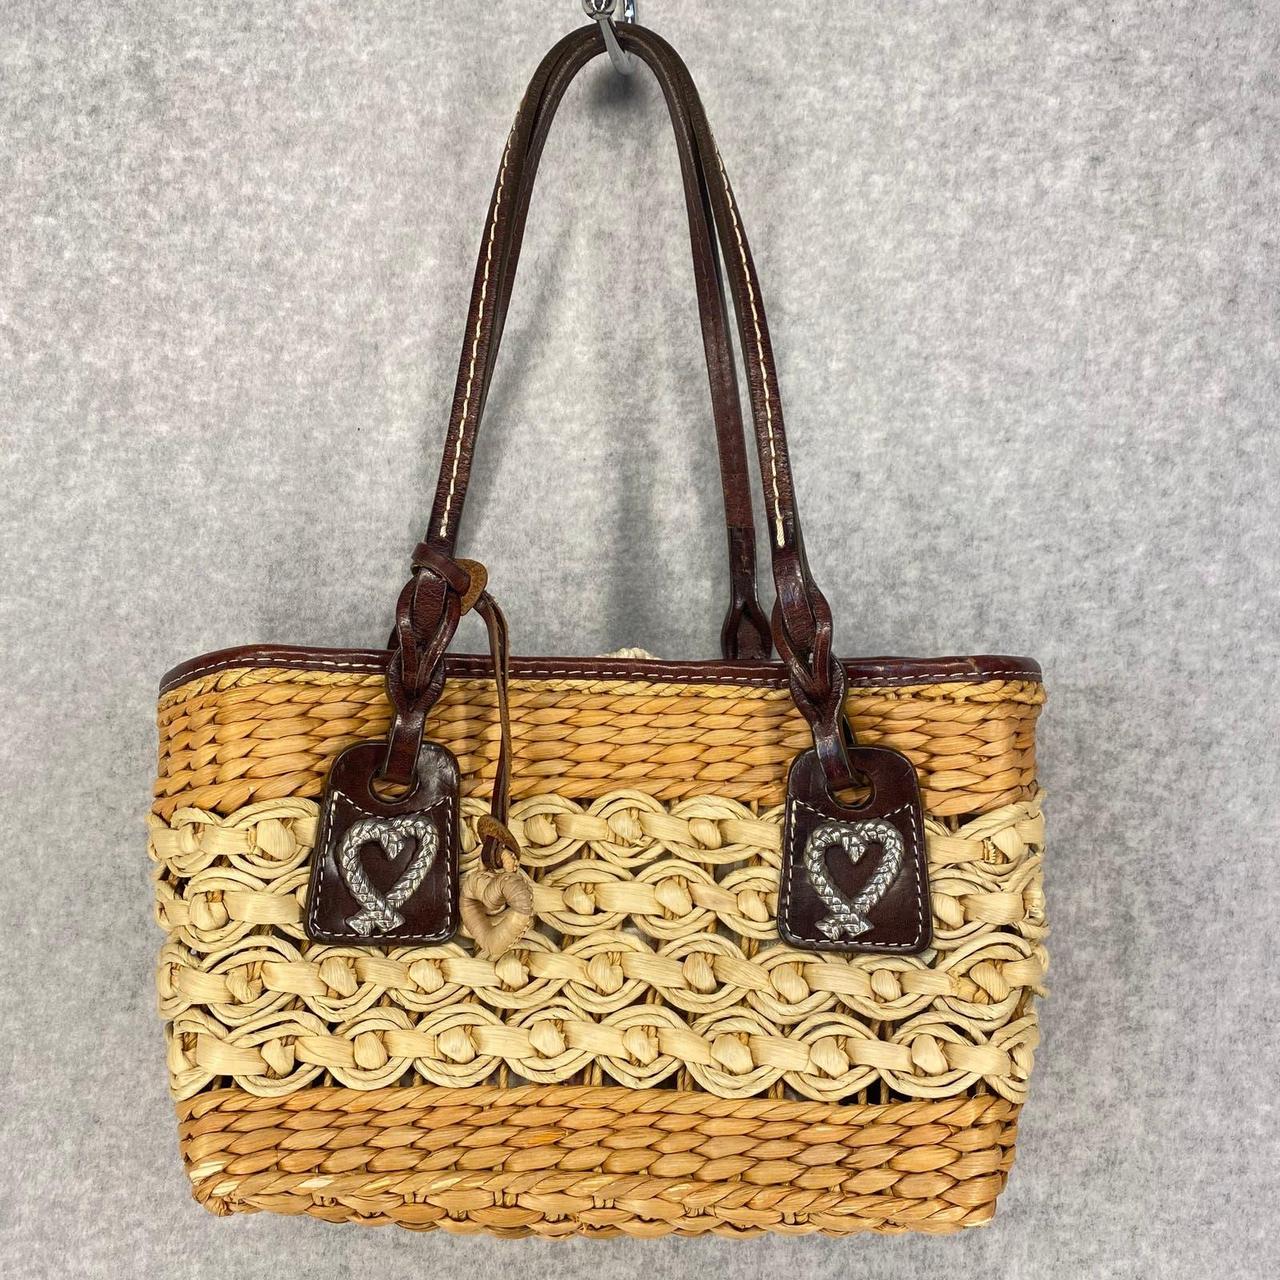 23 South Boutique - Gorgeous Brighton straw bags arriving everyday handmade  in Madagascar!! A special gift Mom is sure to love!!💫❤️✨ #morristown  #shoppingformom #bestgifts | Facebook